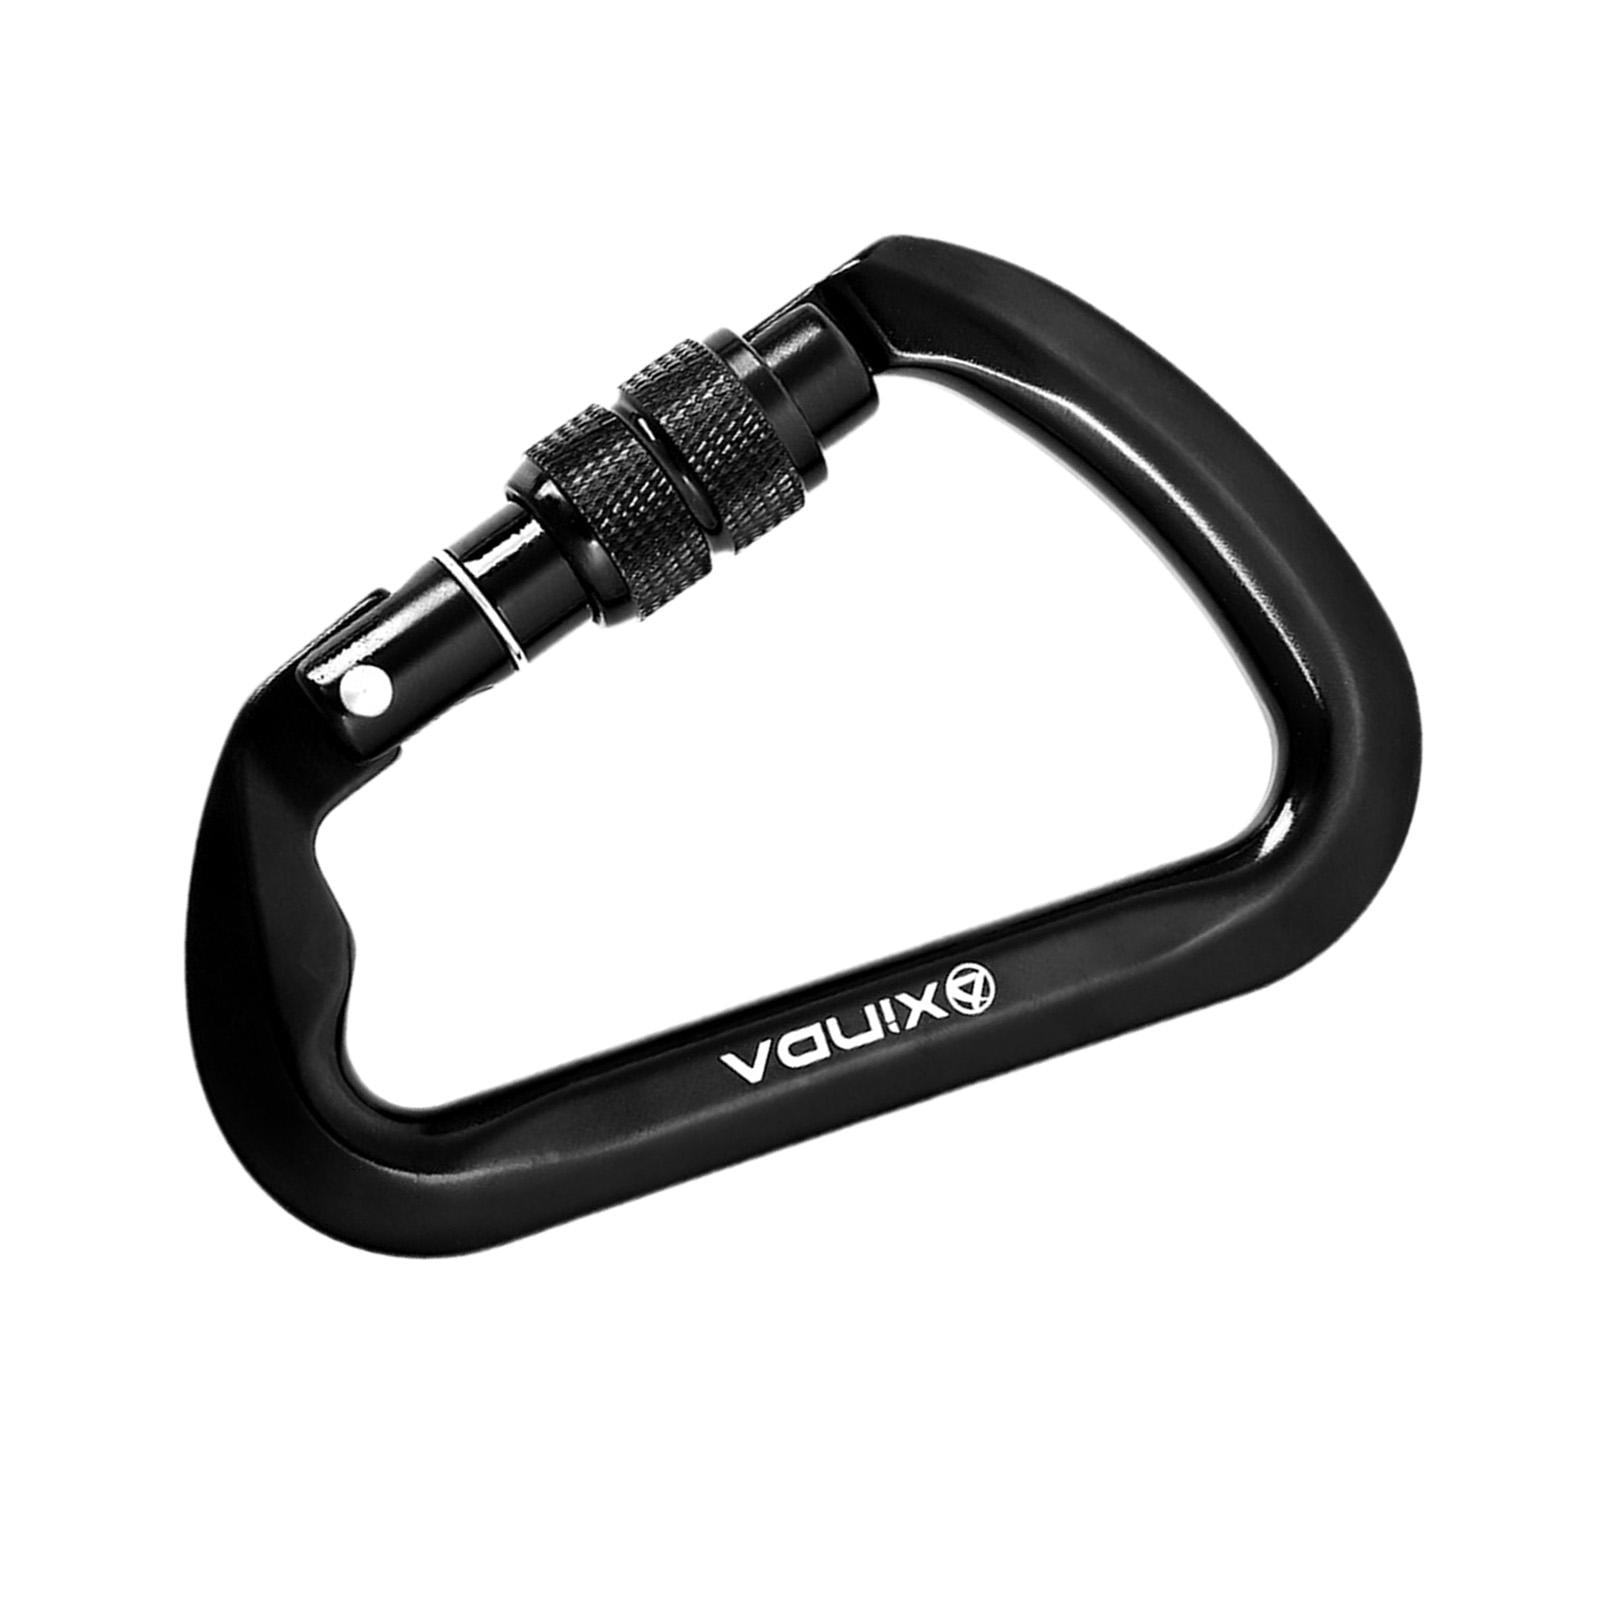 Filmsticks Carabiner D-Clip, Aluminum Alloy in Charcoal Black with Scr